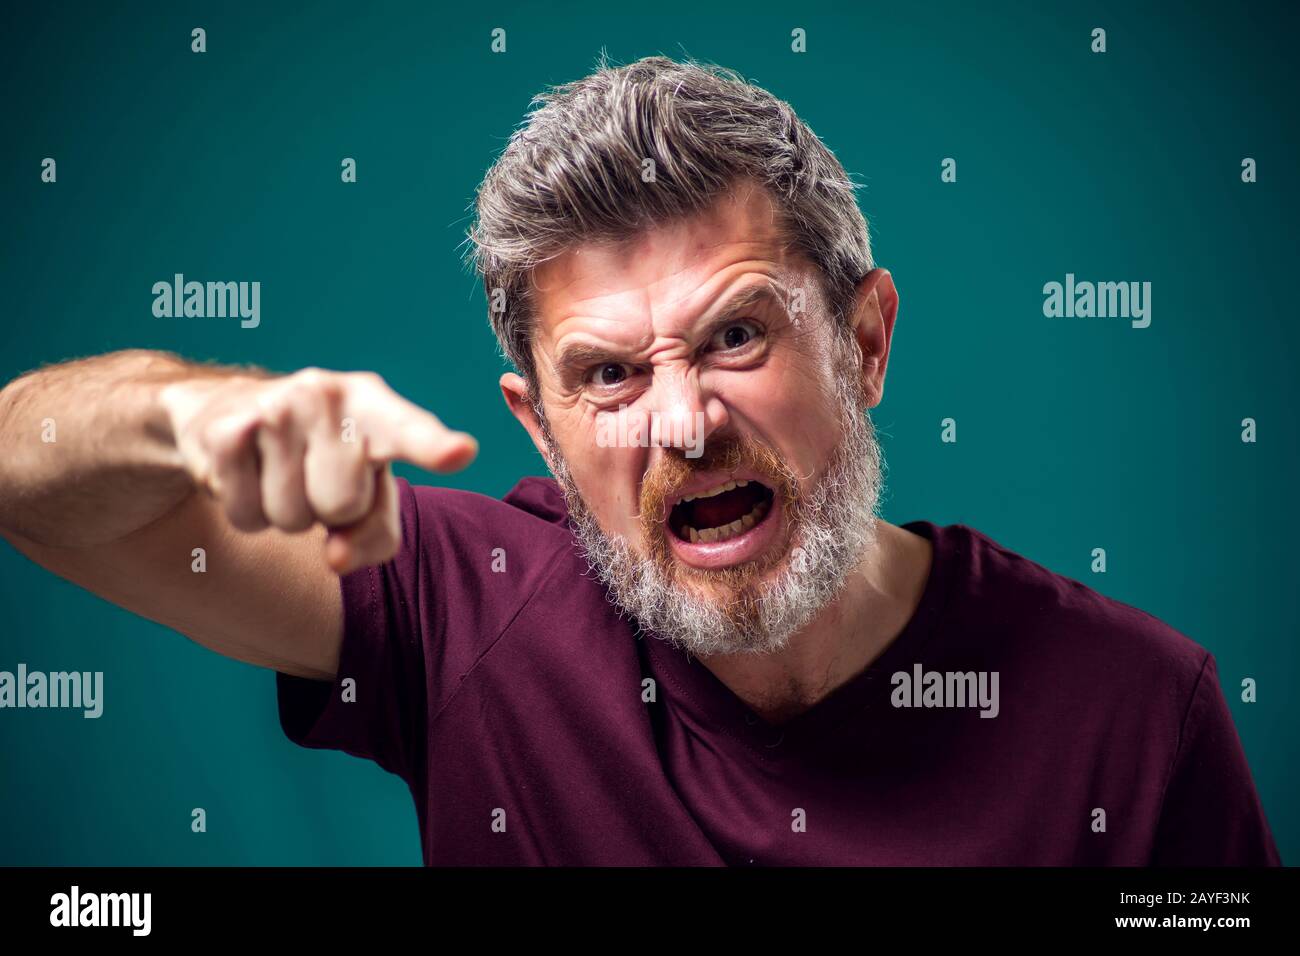 A portrait of angry bearded man in red t-shirt pointing finger at camera. People and emotions concept Stock Photo